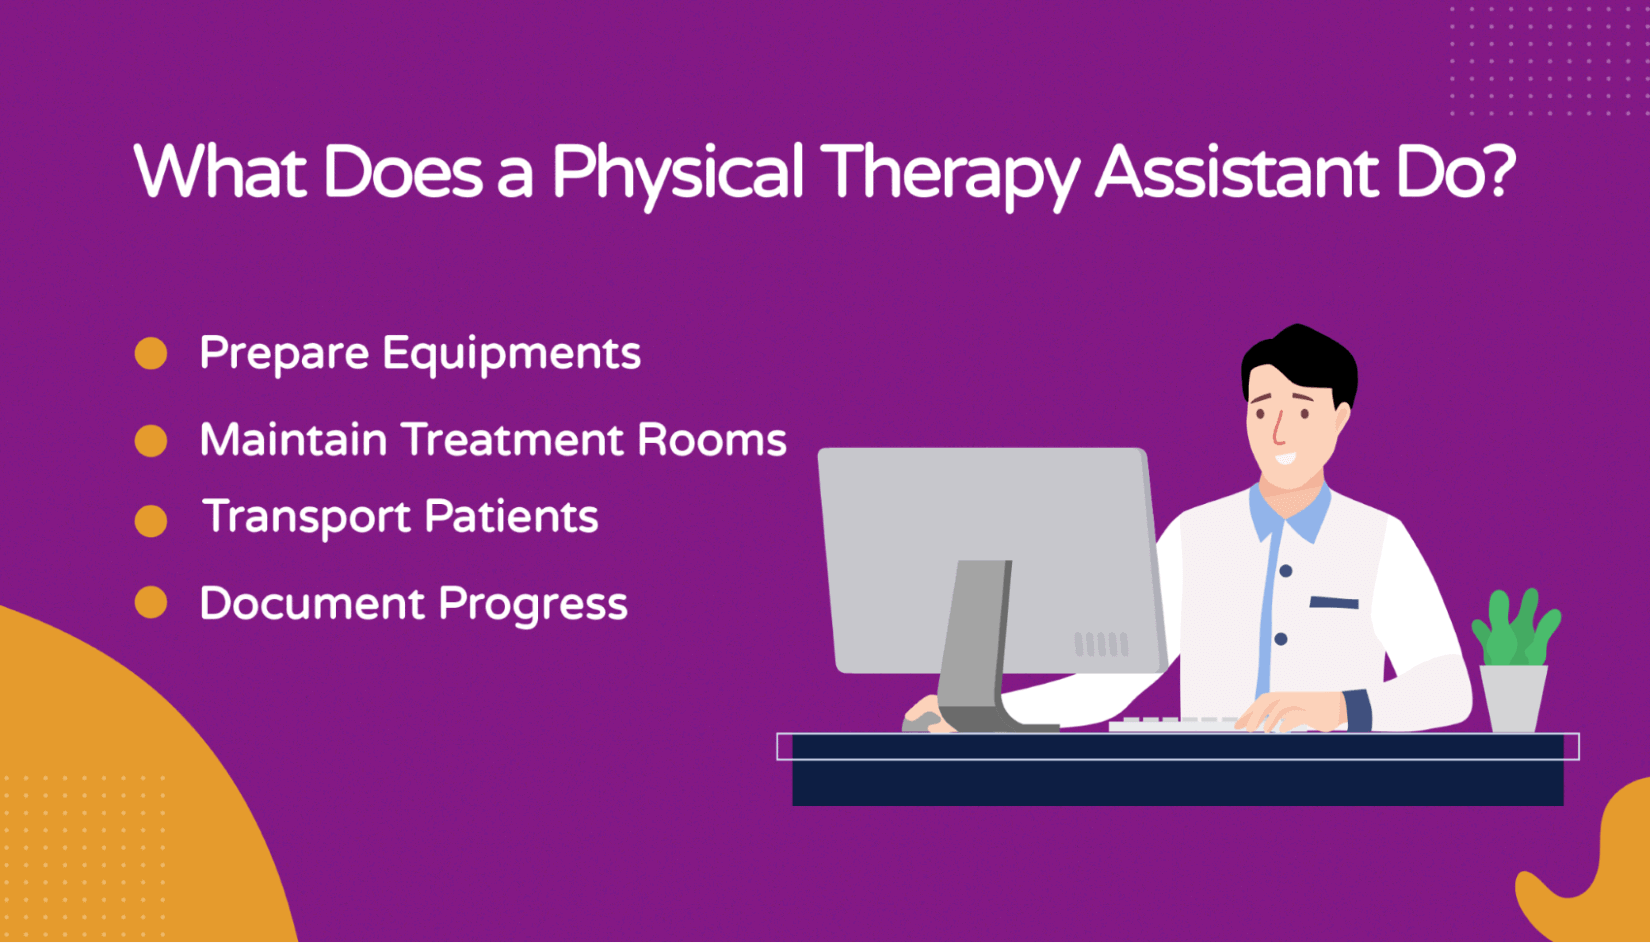 a breakdown of the main responsibilities of a physical therapy assistant